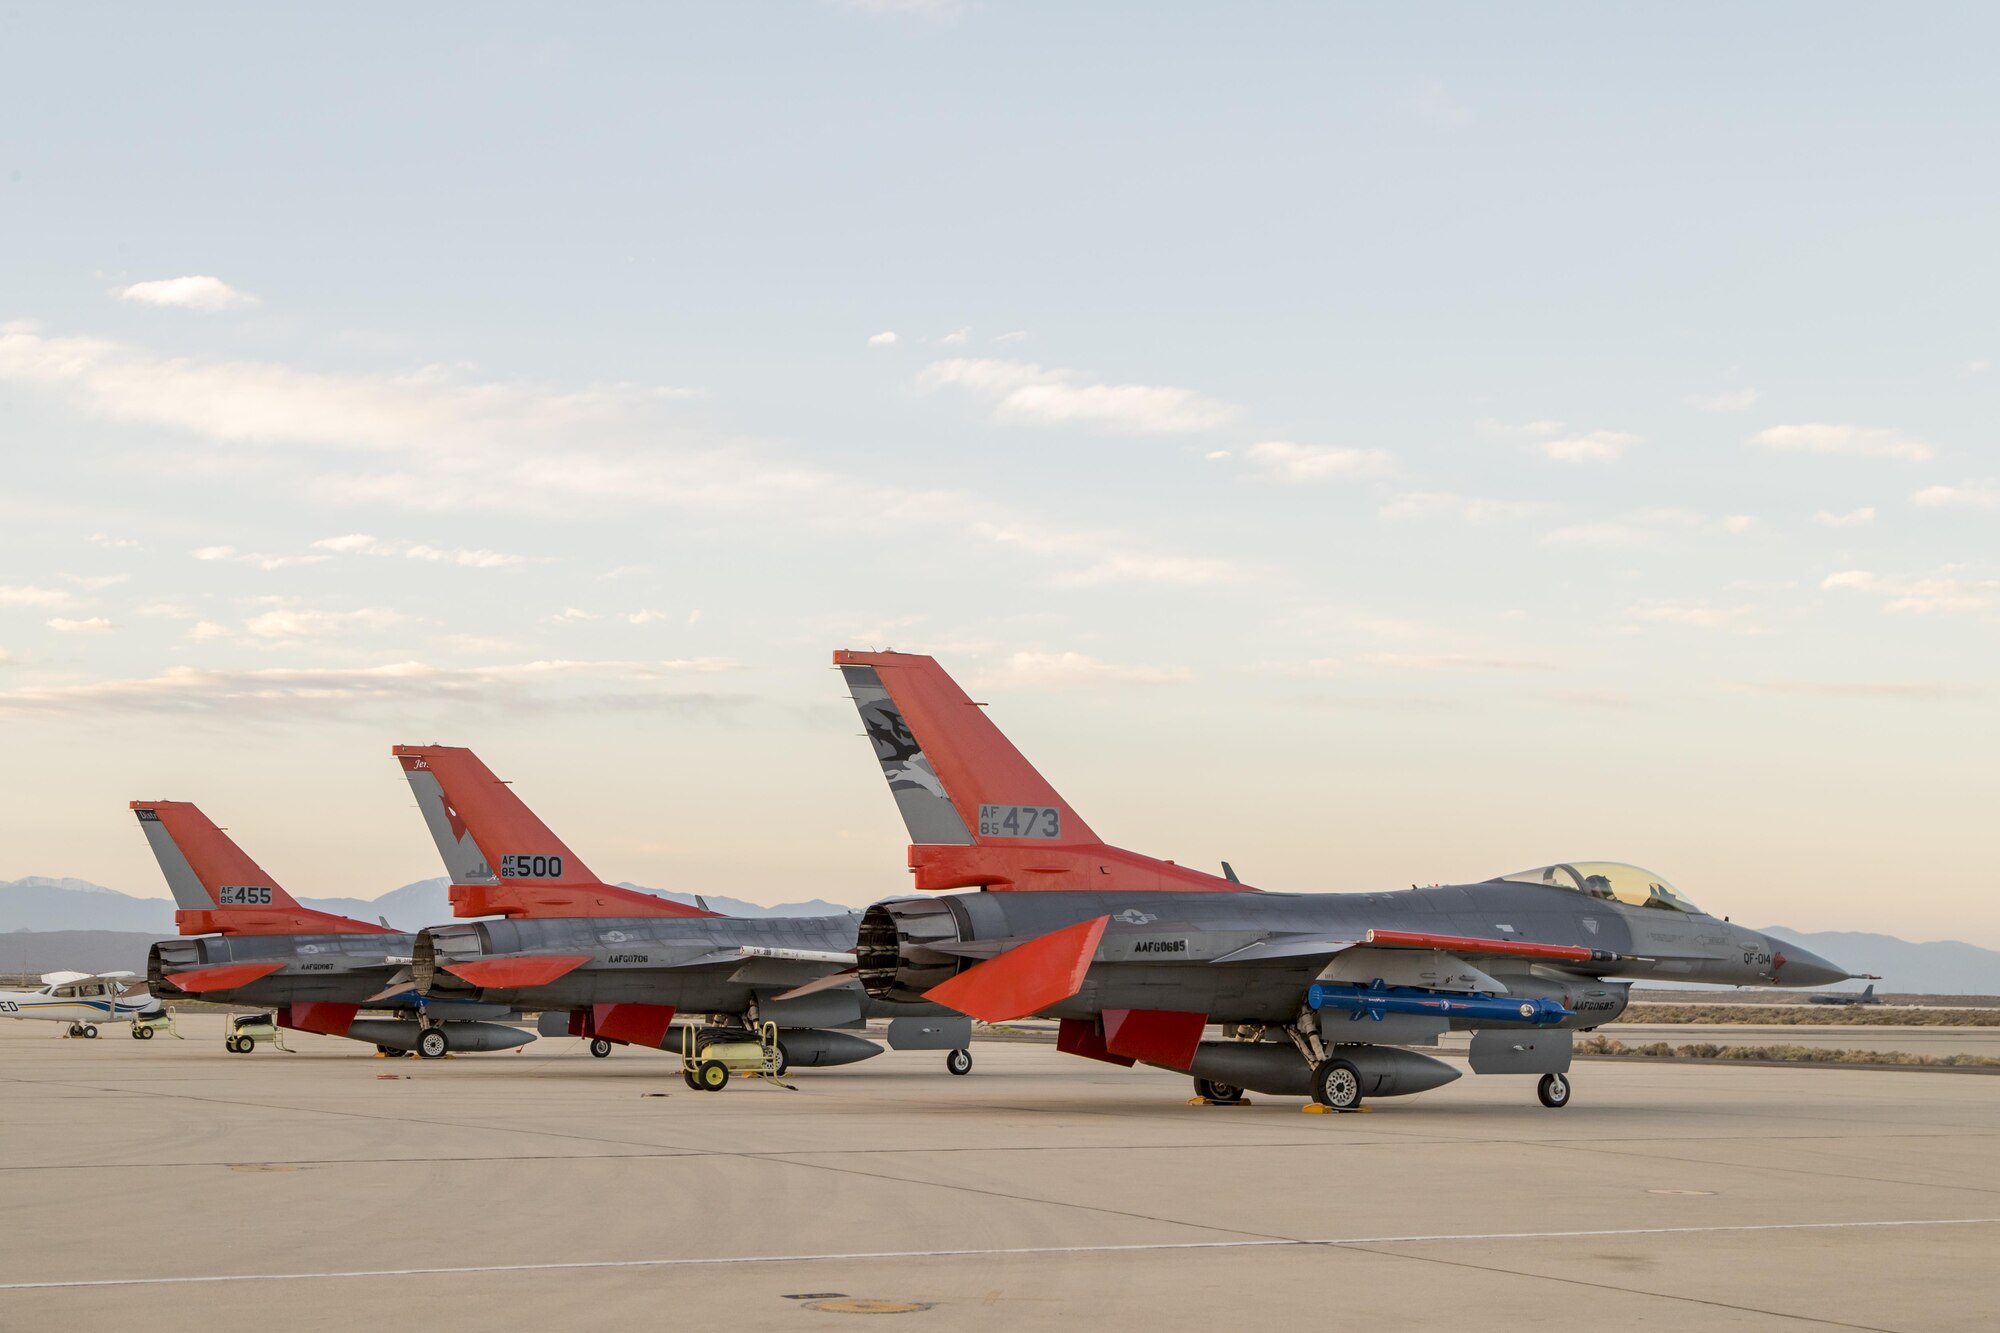 Three QF-16s from Tyndall Air Force Base, Florida, and Holloman Air Force Base, New Mexico, sit on the Edwards AFB flightline April 28. The full-scale aerial targets were requested by the Joint Operational Test Team to assist with test design development for upcoming operational testing of the F-35 Joint Strike Fighter. (U.S. Air Force photo by Chris Higgins)